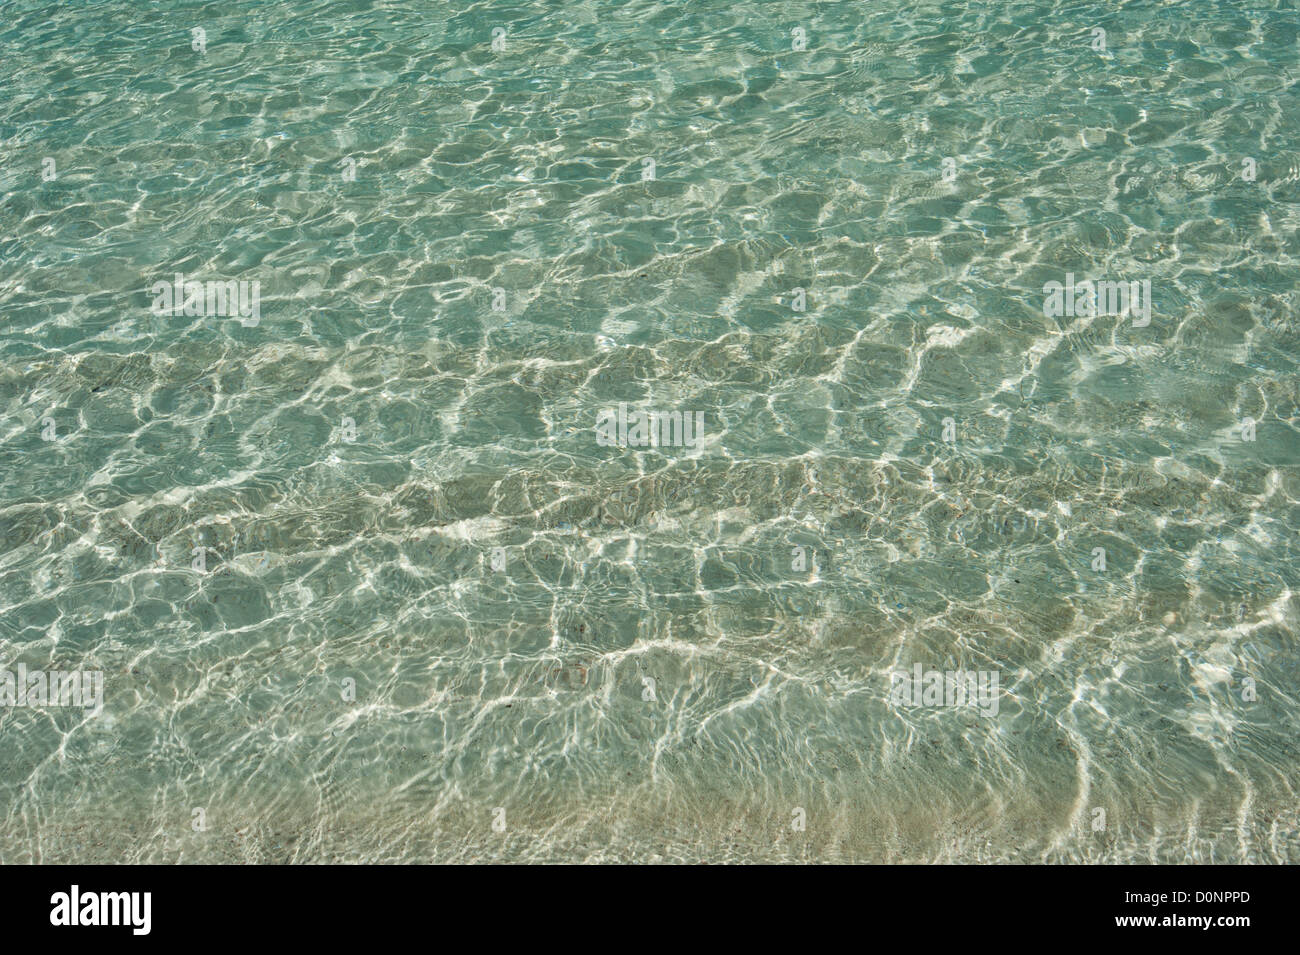 Light refraction through rippling water in a tropical sandy lagoon creating a background wallpaper Stock Photo